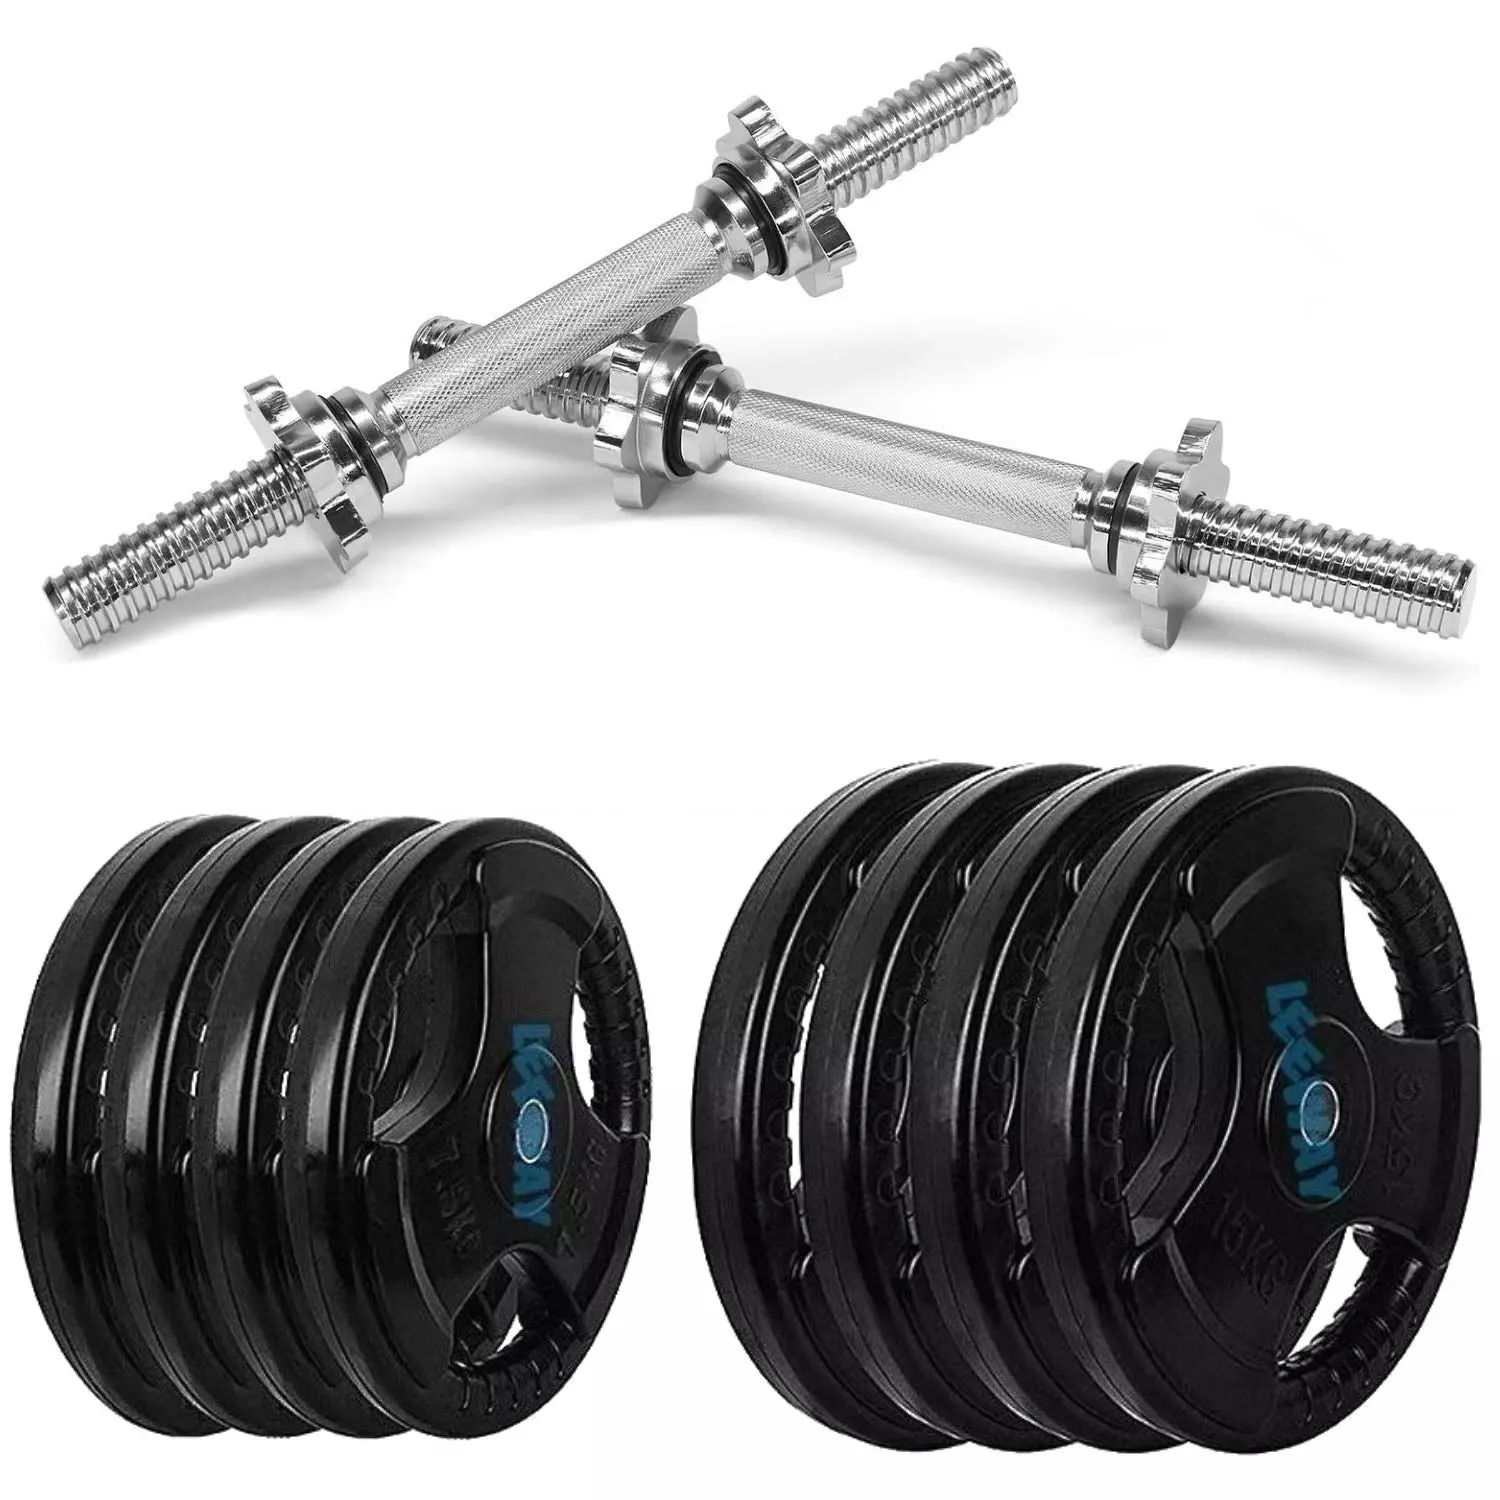 LEEWAY Professional Dumbbell Set with Regular Metal Integrated Olympic Rubber Weight Plates Dumbbells Kit Home Gym Set Quad Rubber Coated Adjustable..